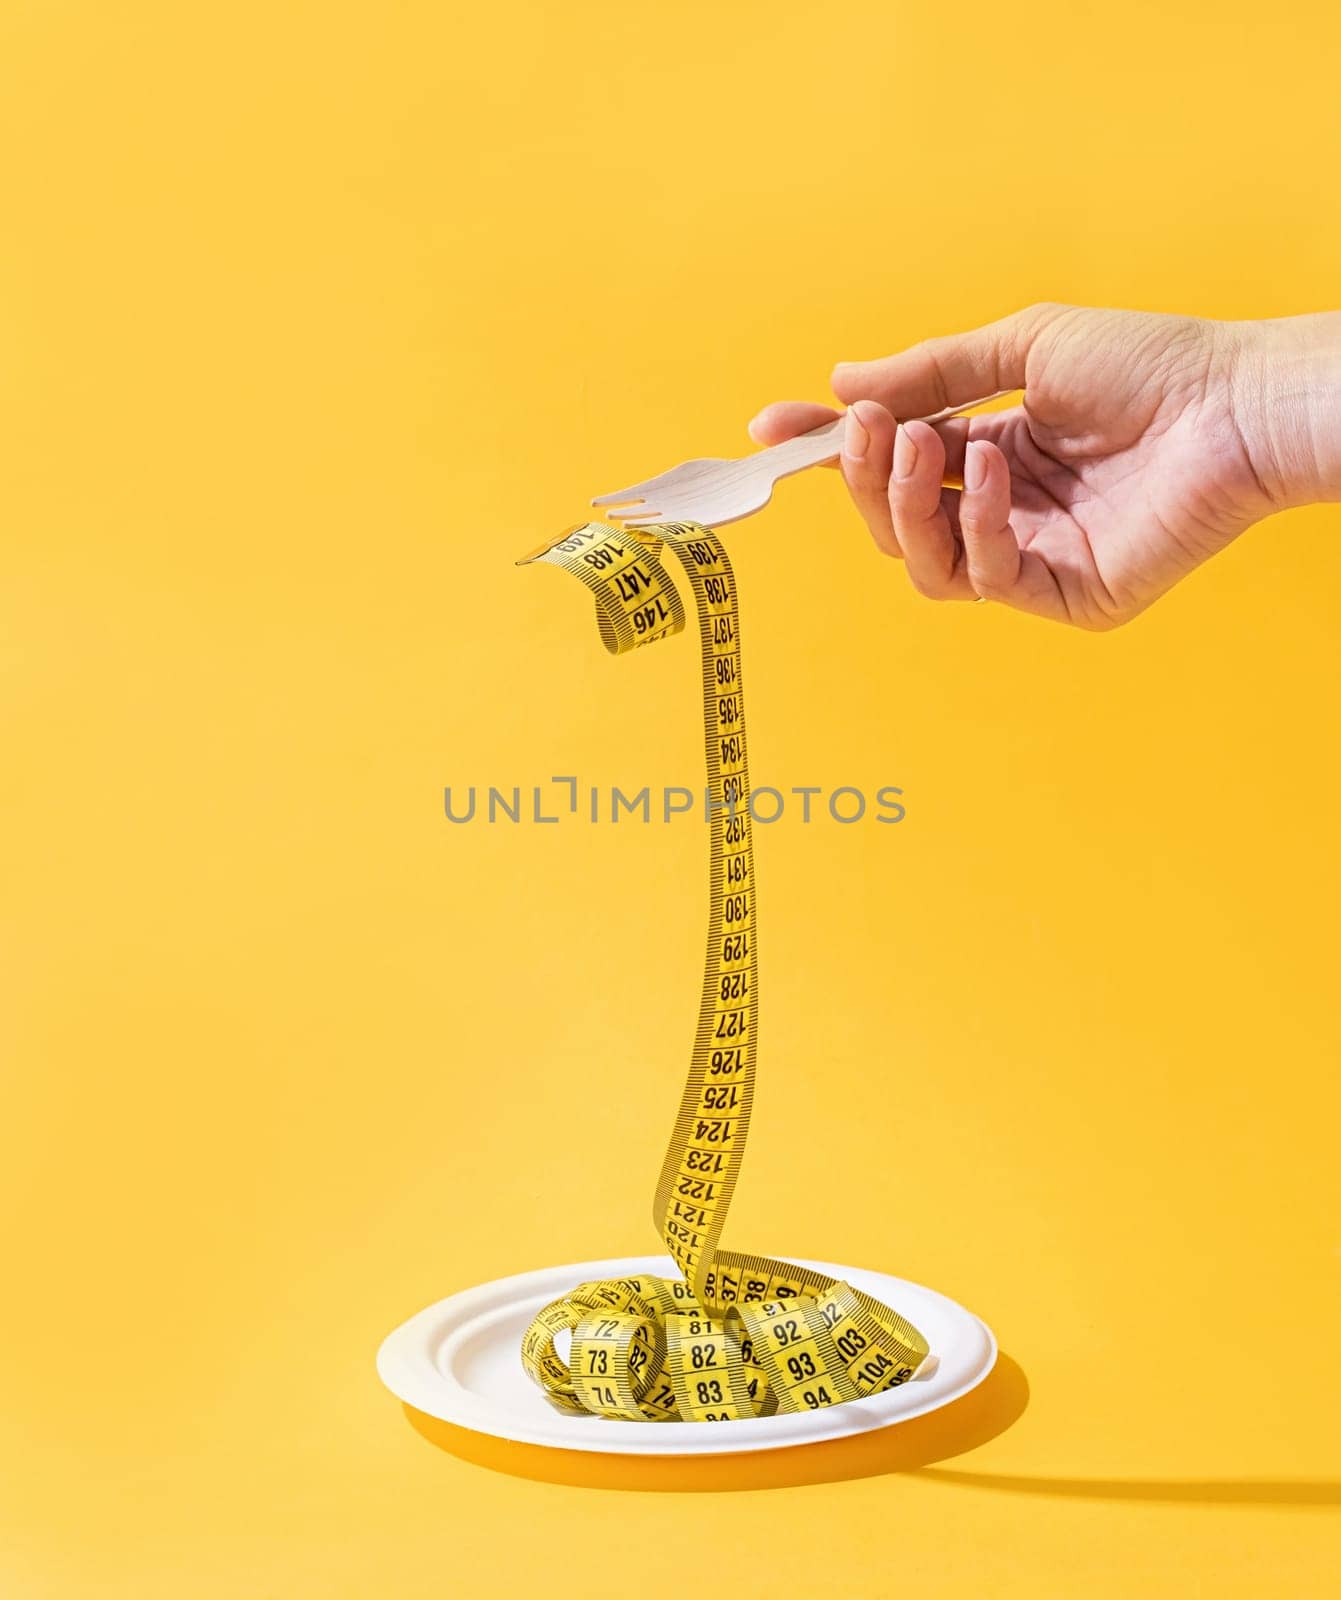 woman hands holding colorful measuring tape front view on plate on bright yellow background by Desperada